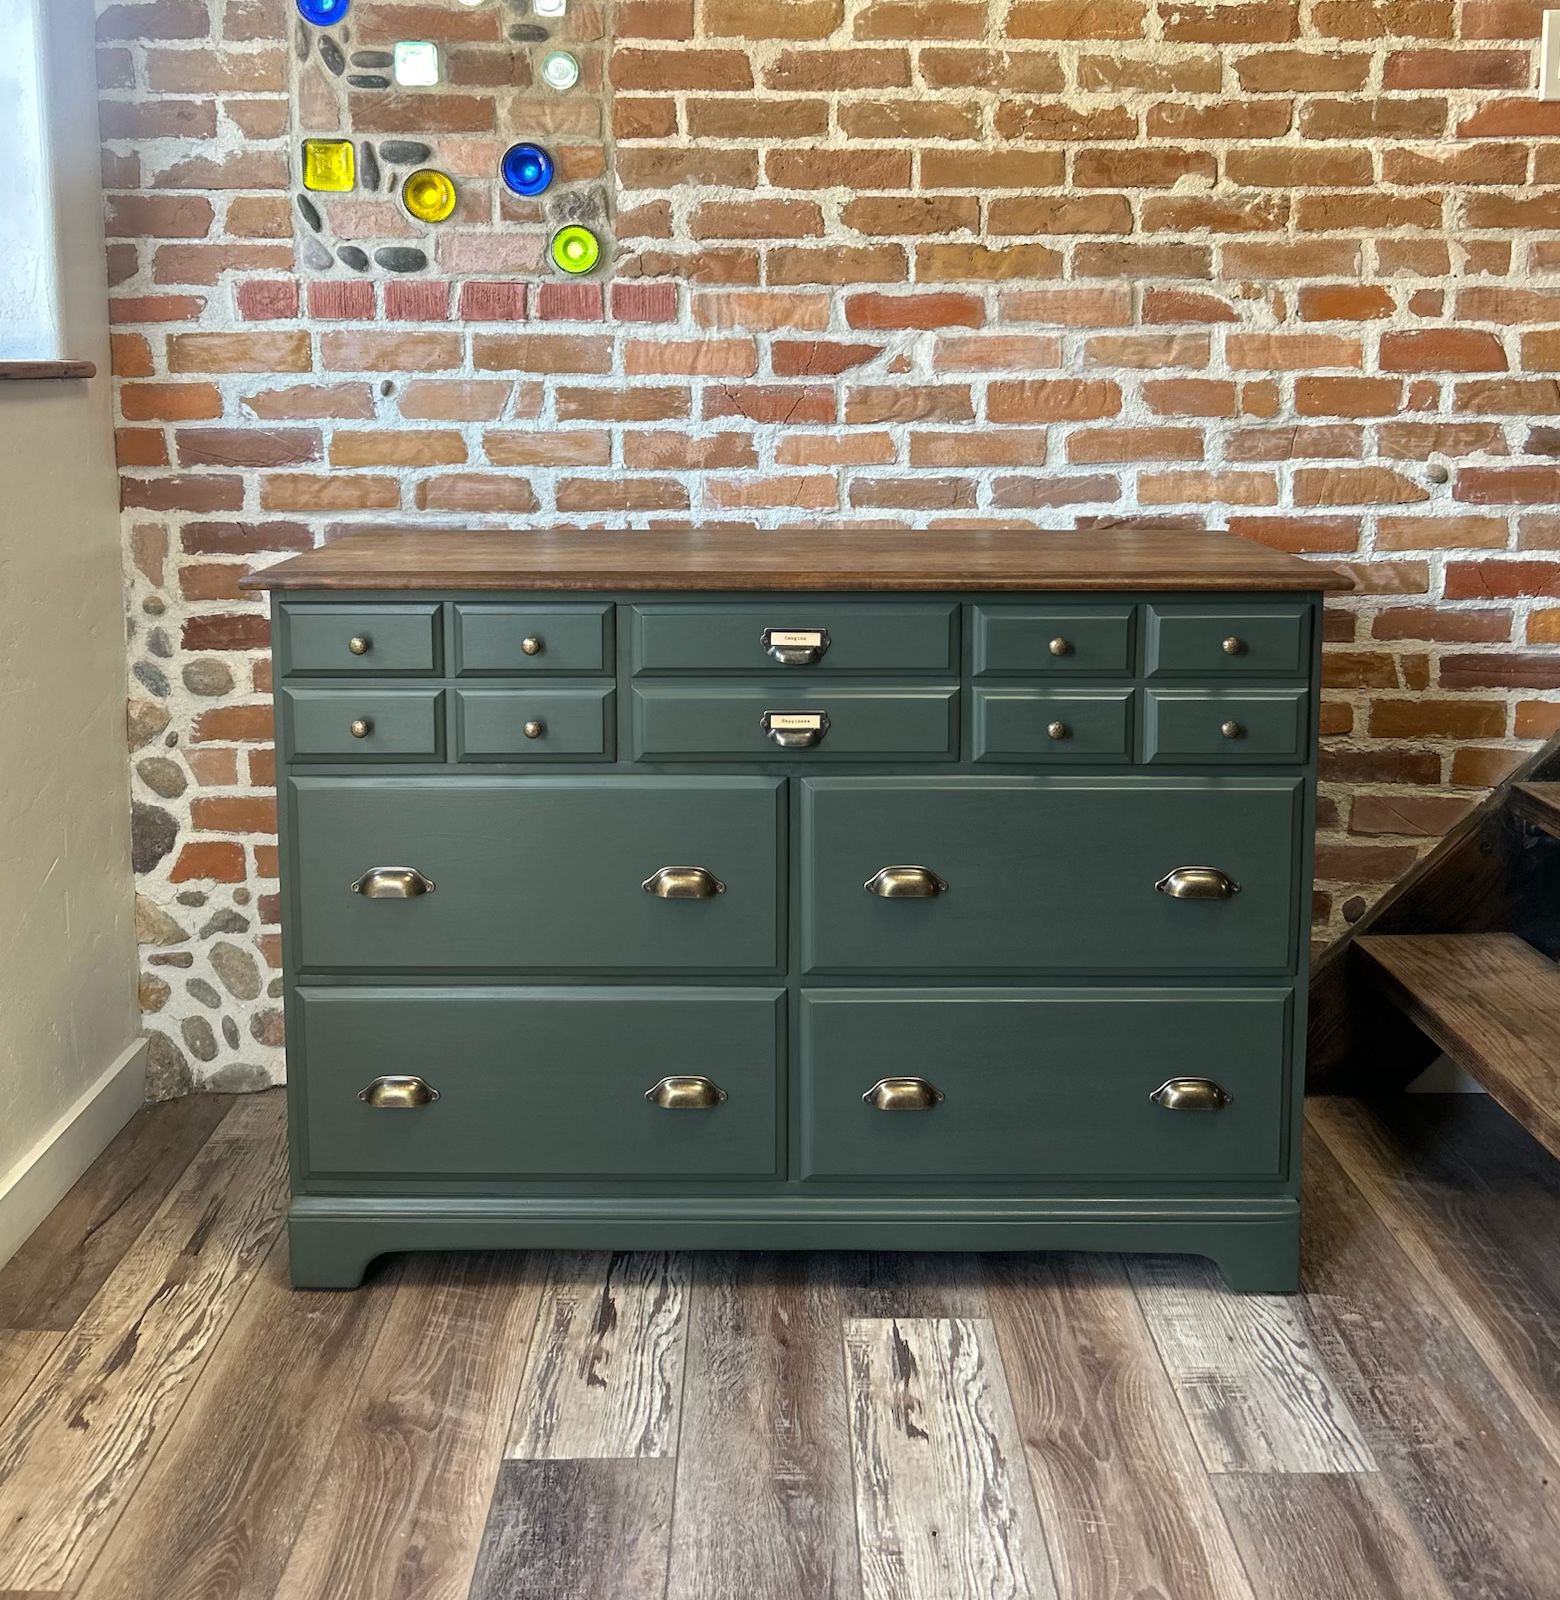 Refinished Vintage Apothecary Style Dresser / Changing Table! 